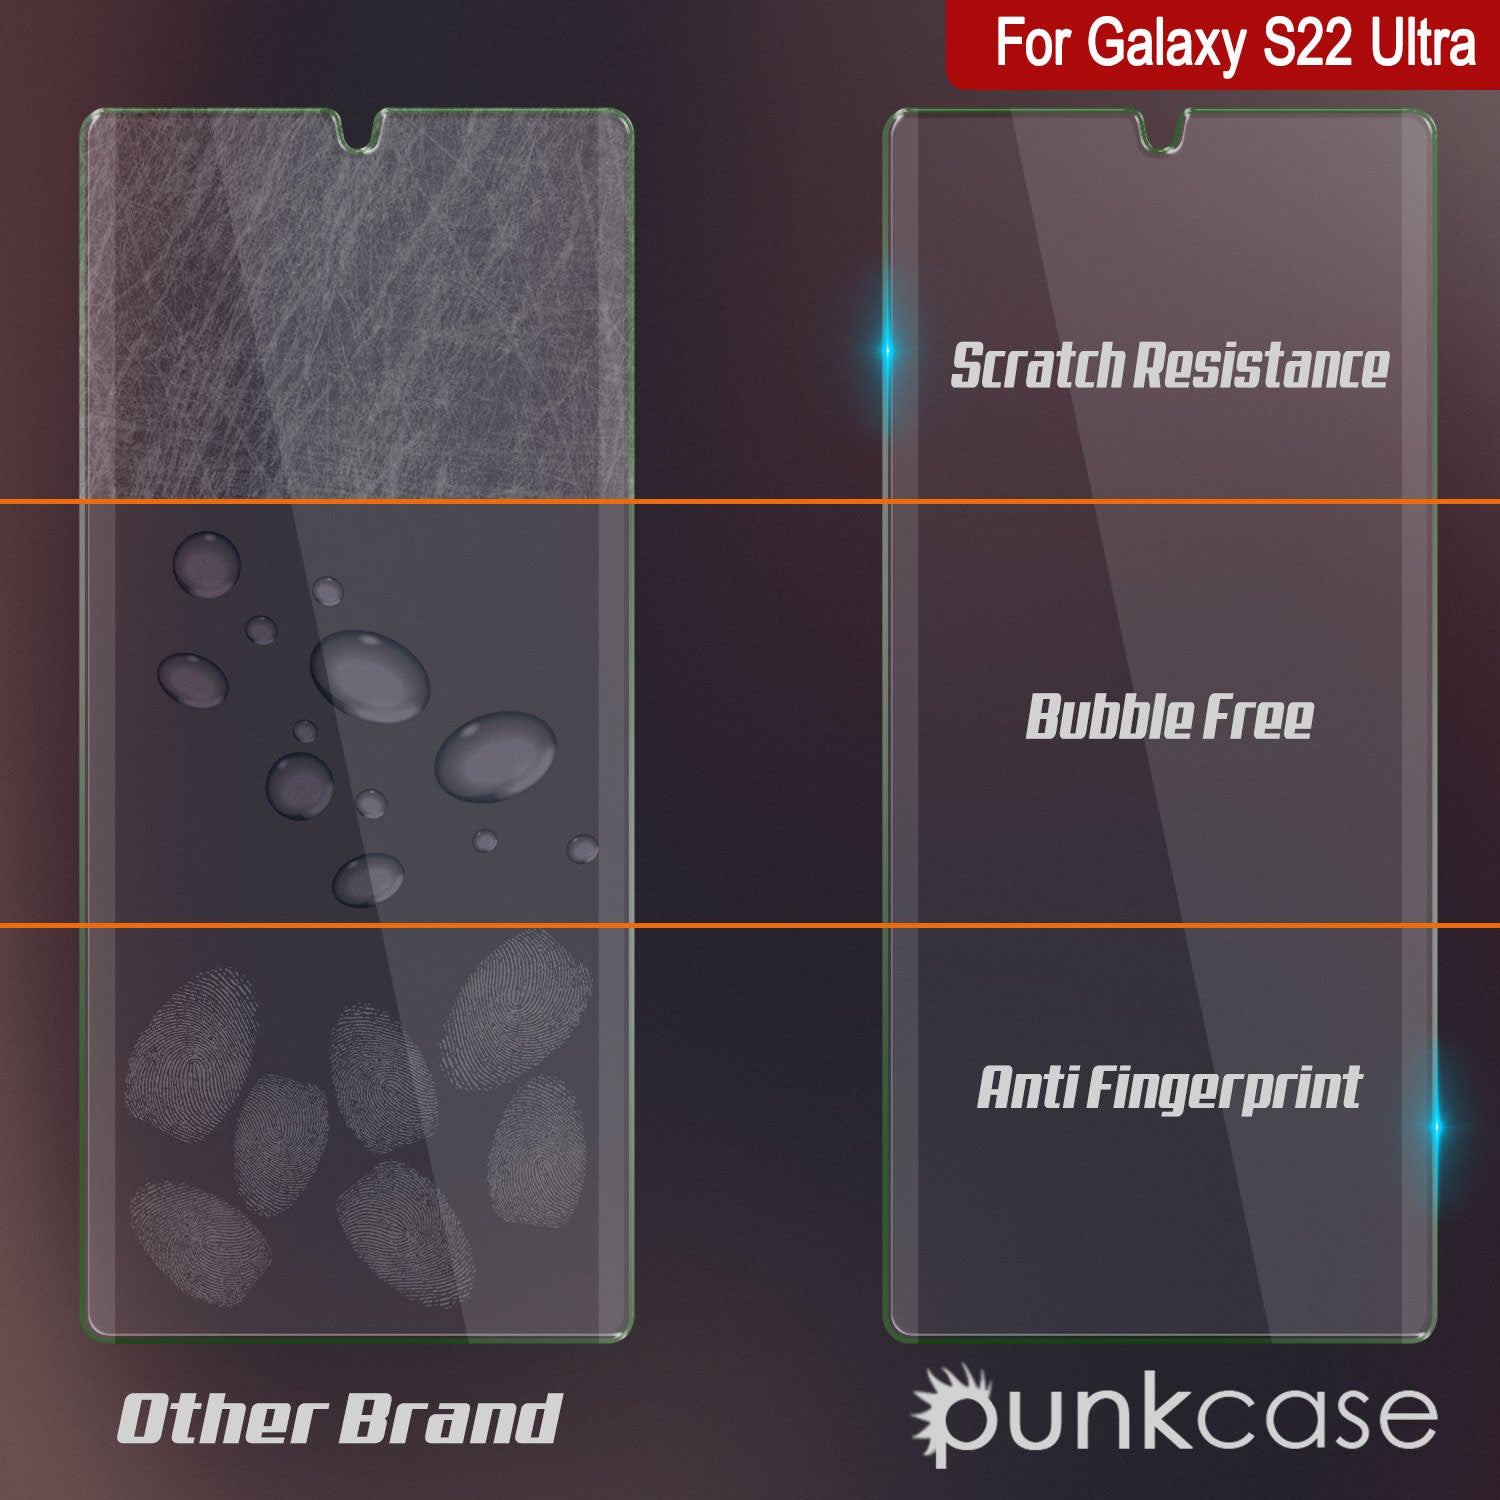 Galaxy S22 Ultra White Punkcase Glass SHIELD Tempered Glass Screen Protector 0.33mm Thick 9H Glass